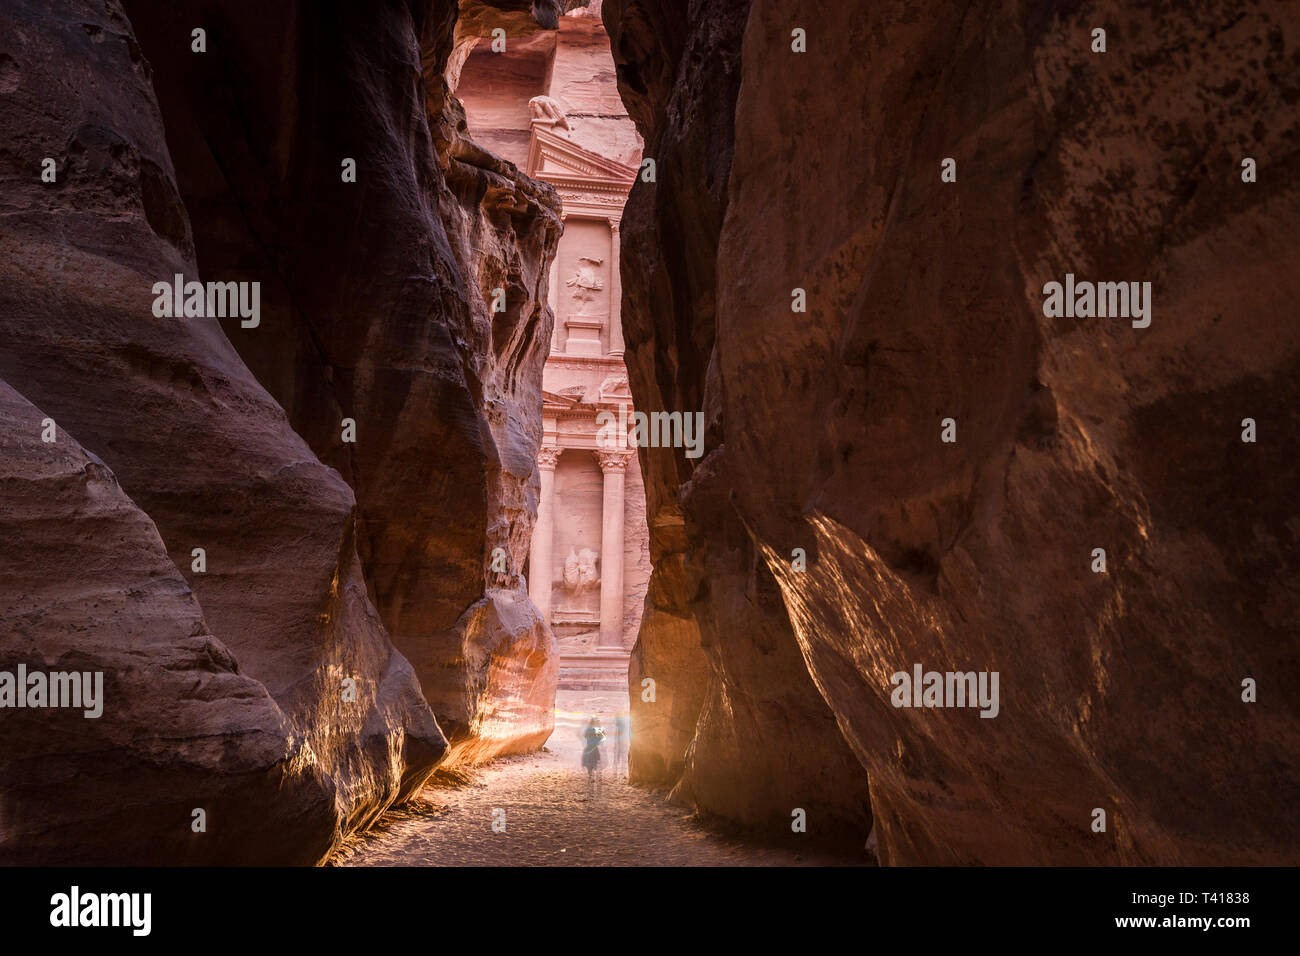 Two people standing in gorge by the Treasury, Petra, Jordan Stock Photo